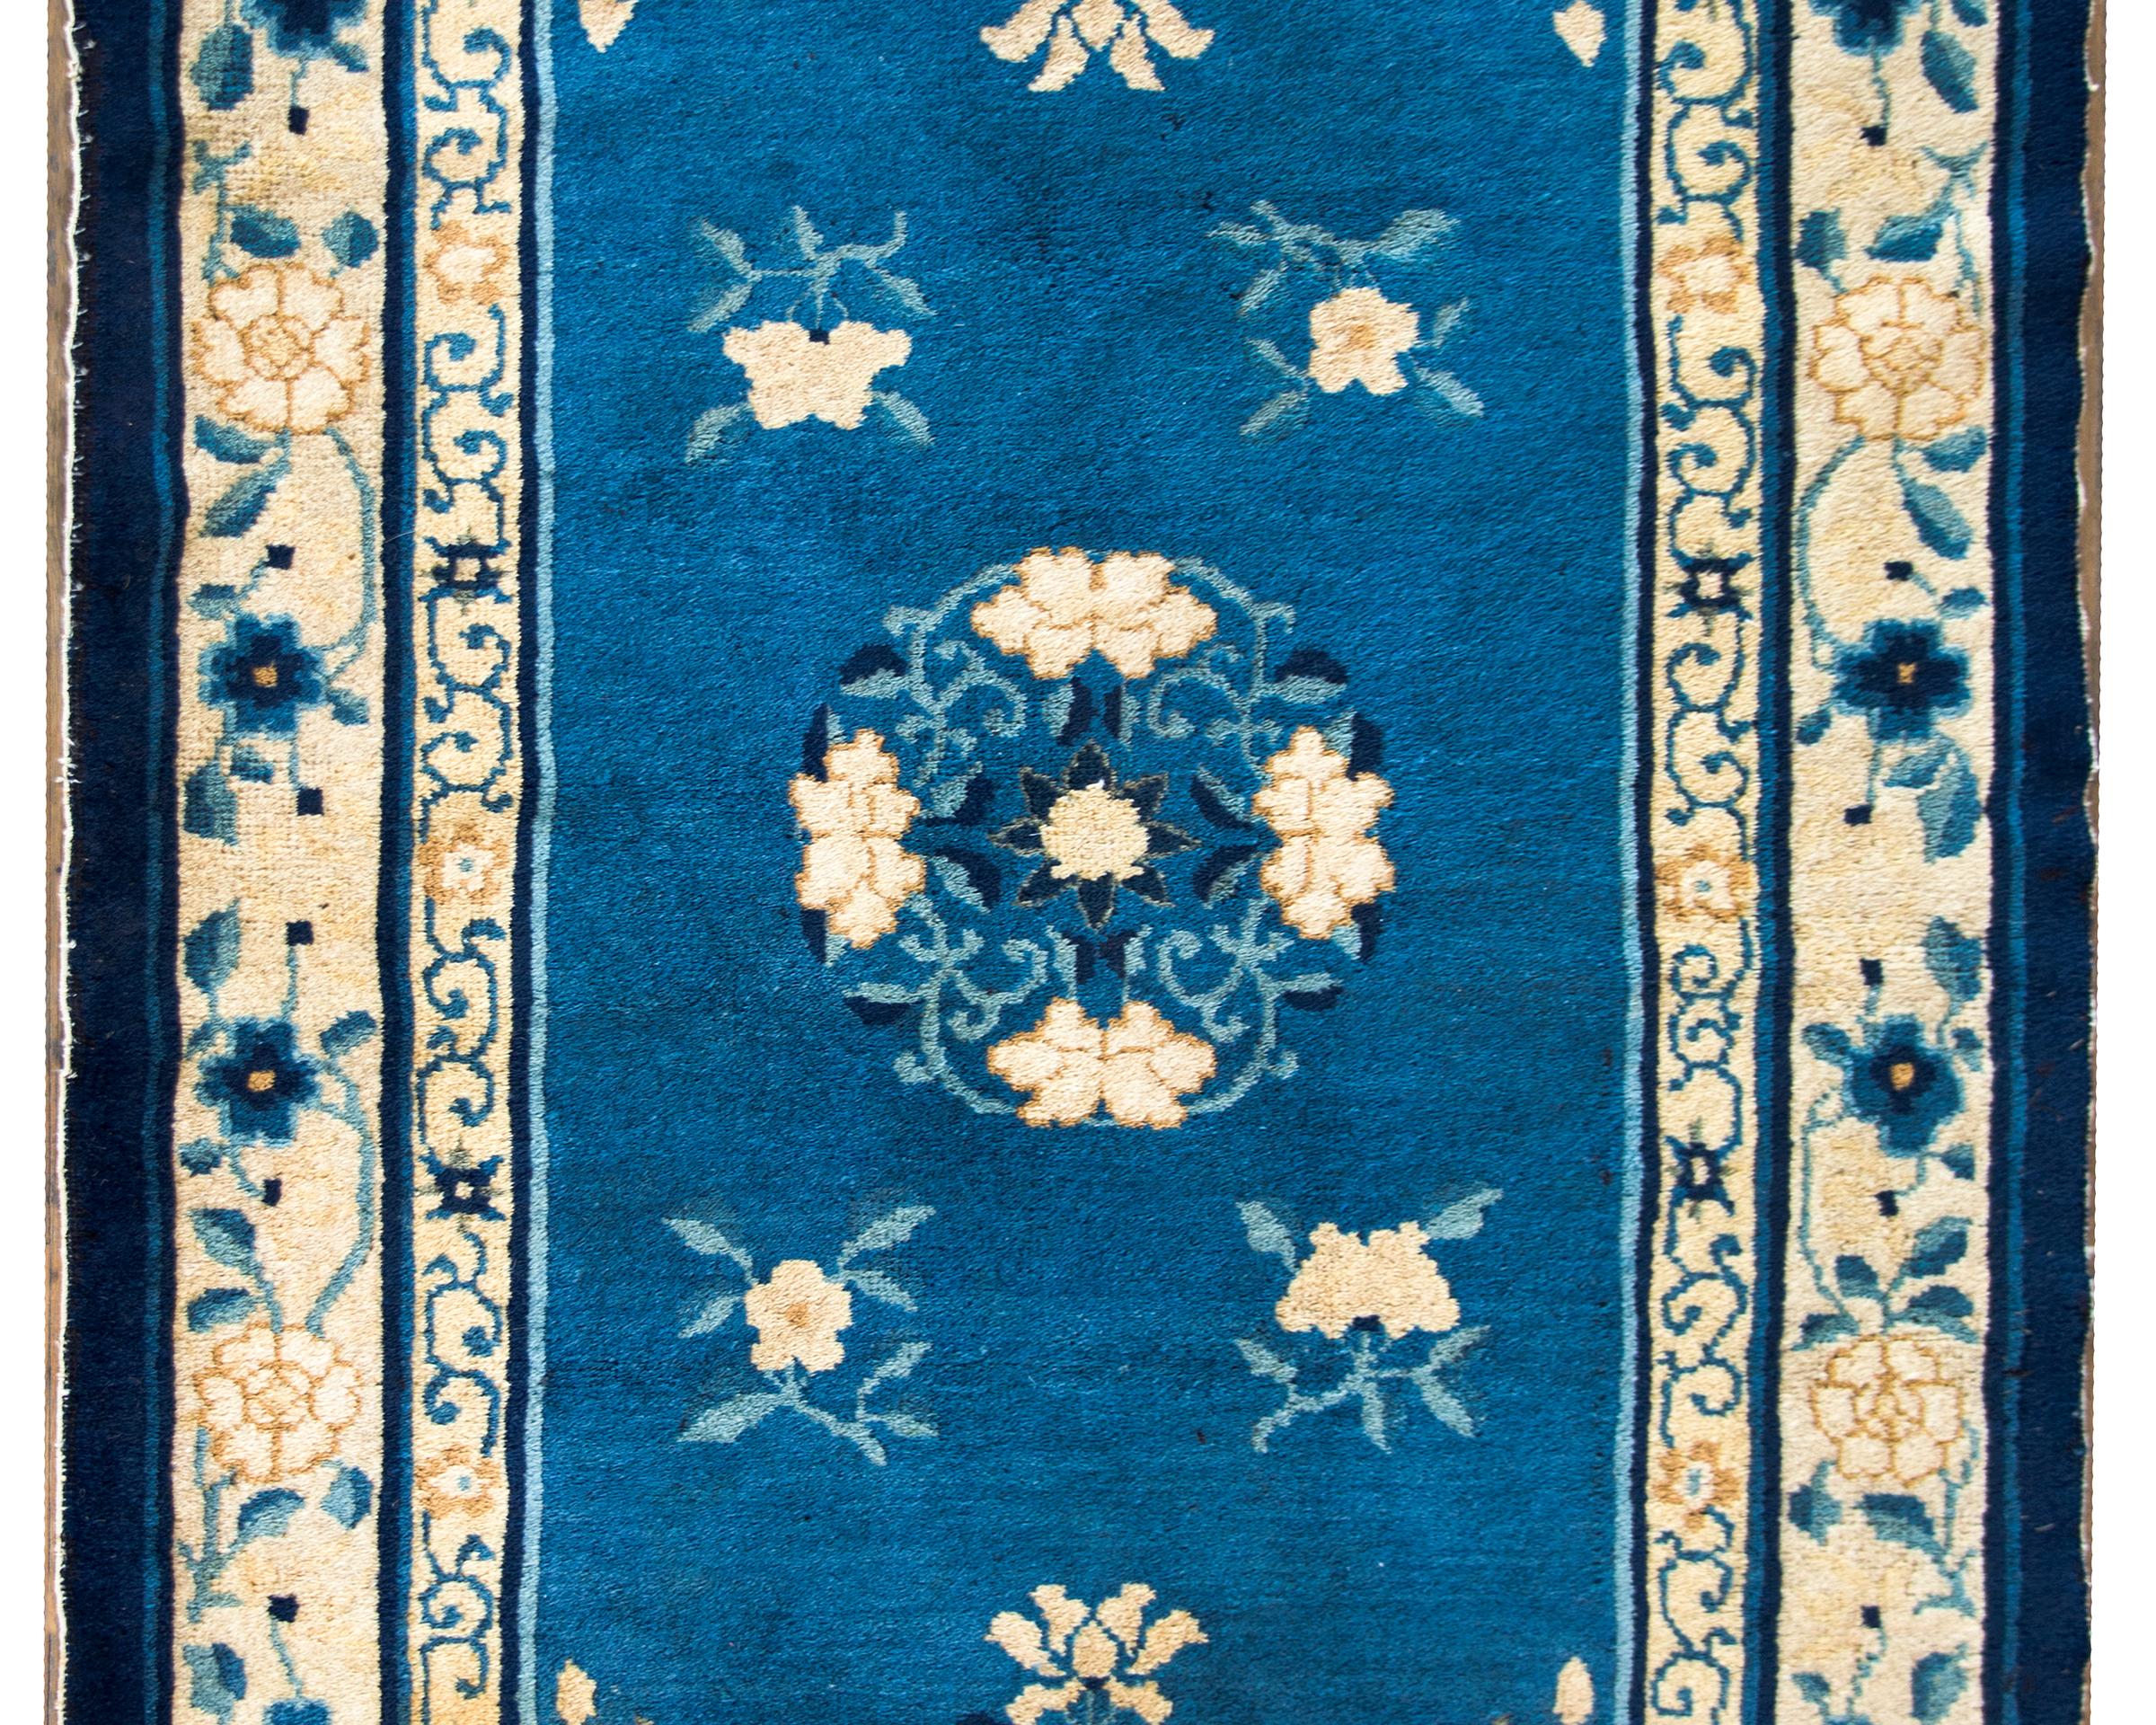 A wonderful early 20th century Chinese Peking rug with a central peony medallion living amidst a field of more peonies, chrysanthemums, and lotus flowers, all woven in cream, brown, and dark indigo set against a light indigo background.  The border